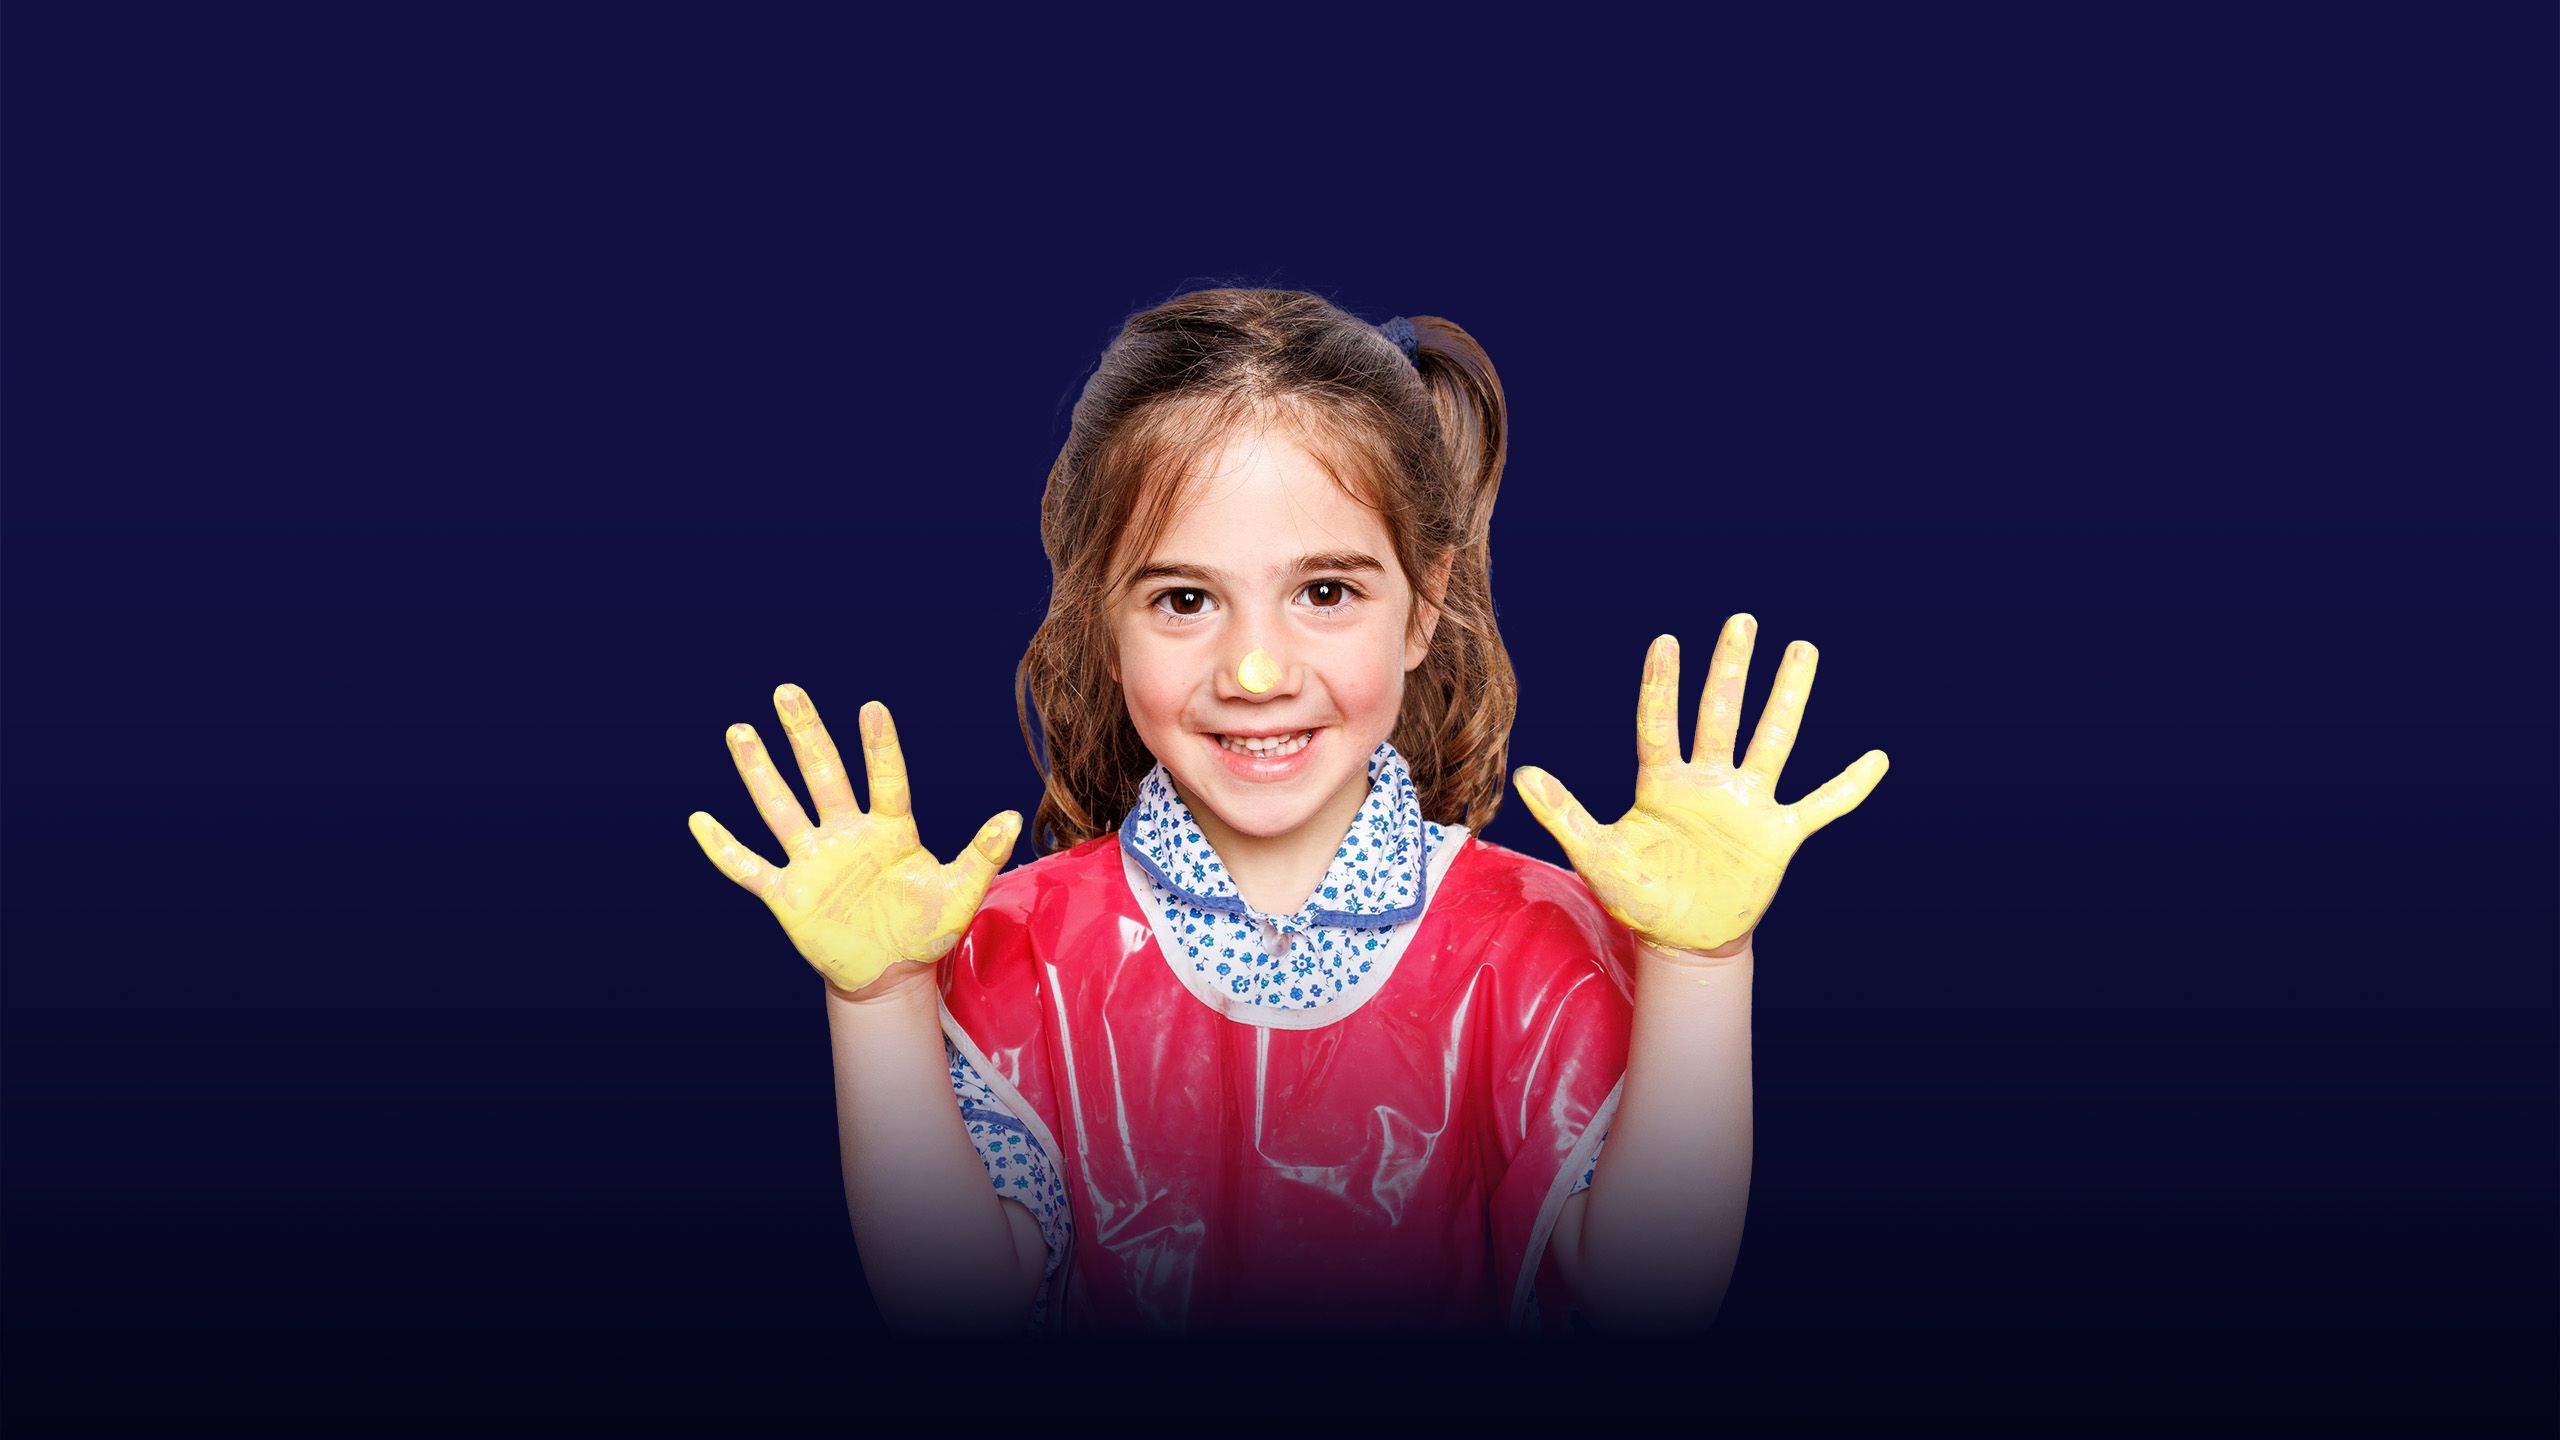 Image of a little girl showing yellow paint on her hands with a overlay of the text "instilling values"